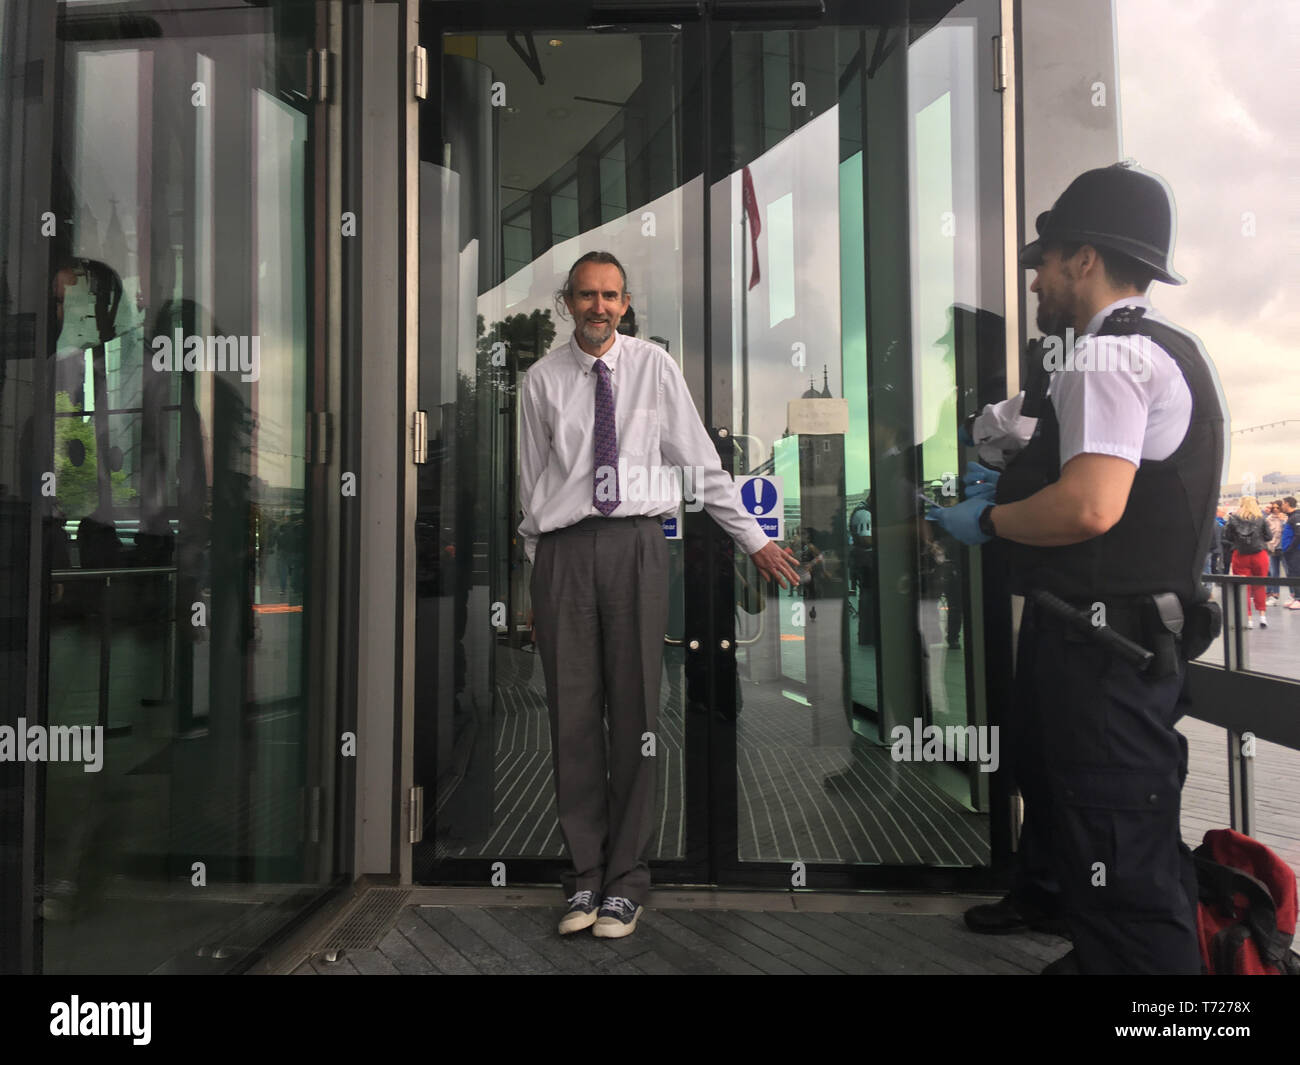 Climate protester and PhD student Roger Hallam after he and two others glued themselves to City Hall in London to raise awareness of climate change ahead of the EU elections. Stock Photo